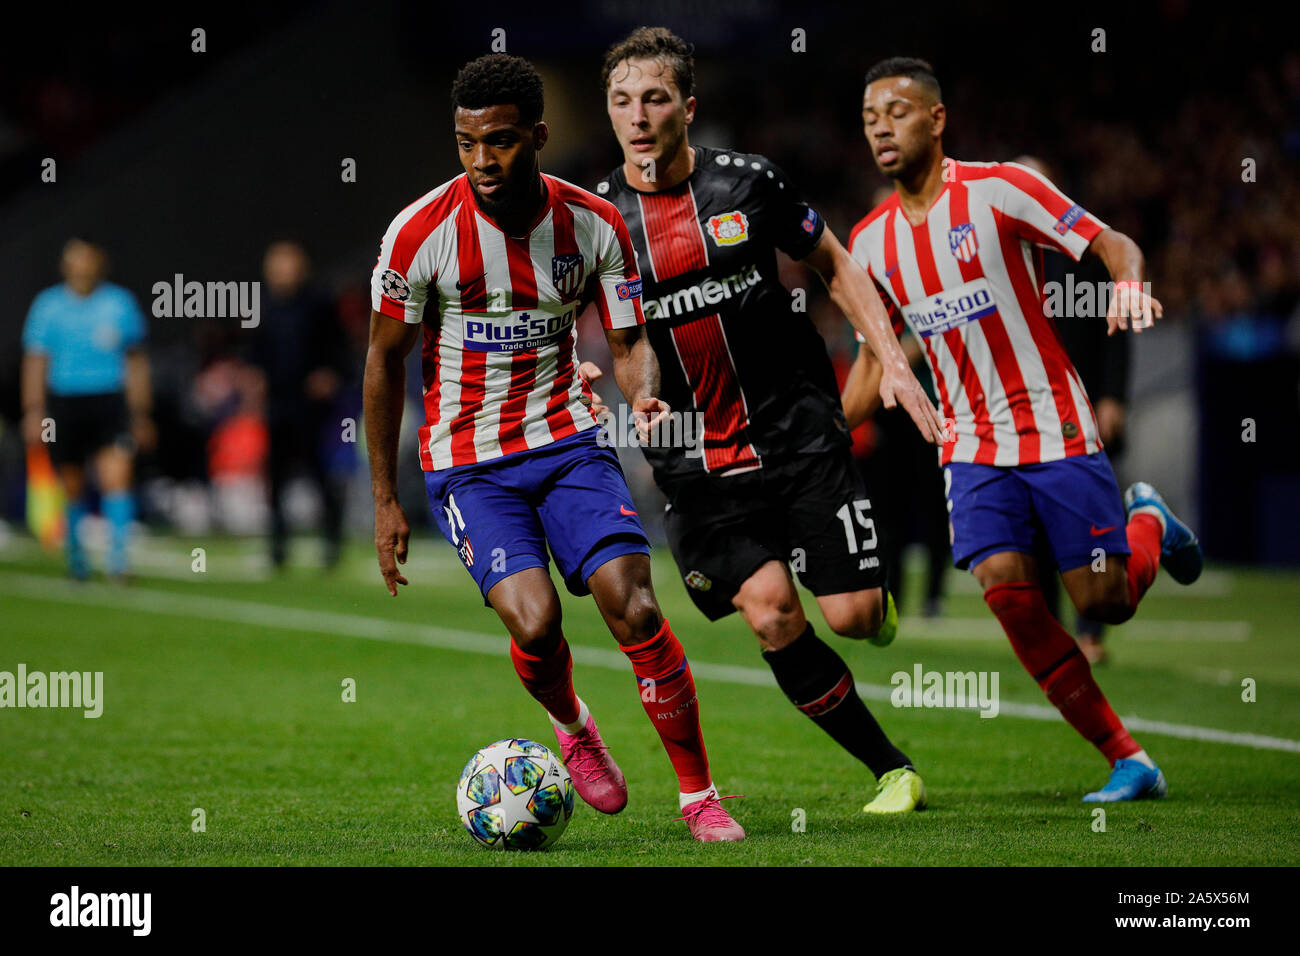 Madrid, Spain. 22nd Oct, 2019. Renan Lodi of Atletico de Madrid and Julian Baumgartlinger of Bayer 04 Leverkusen are seen in action during the UEFA Europa League match between Atletico de Madrid and Bayer 04 Leverkusen at Wanda Metropolitano Stadium in Madrid.(Final score: Atletico de Madrid 1:0 Bayer 04 Leverkusen) Credit: SOPA Images Limited/Alamy Live News Stock Photo